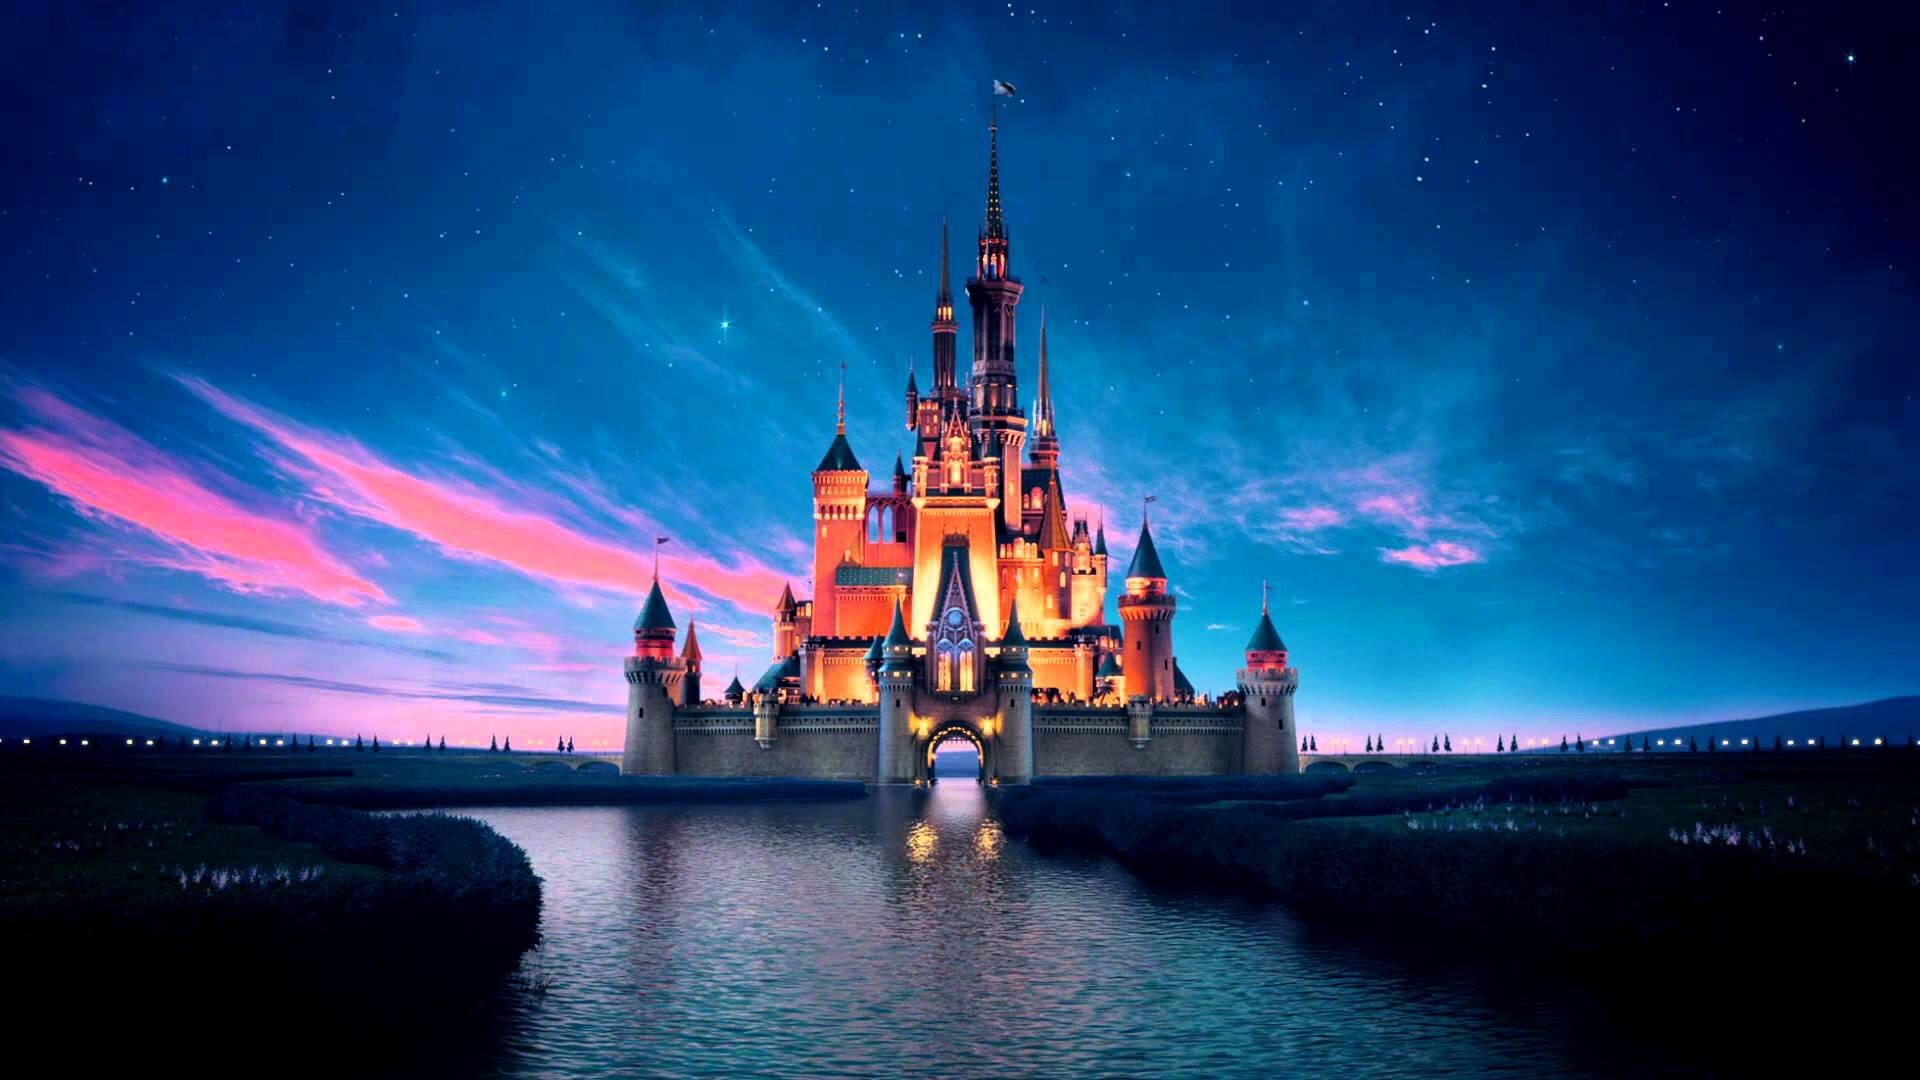 1920x1080, Wallpapers For > Disney Castle Background - Disney Castle Wallpaper Hd - HD Wallpaper 